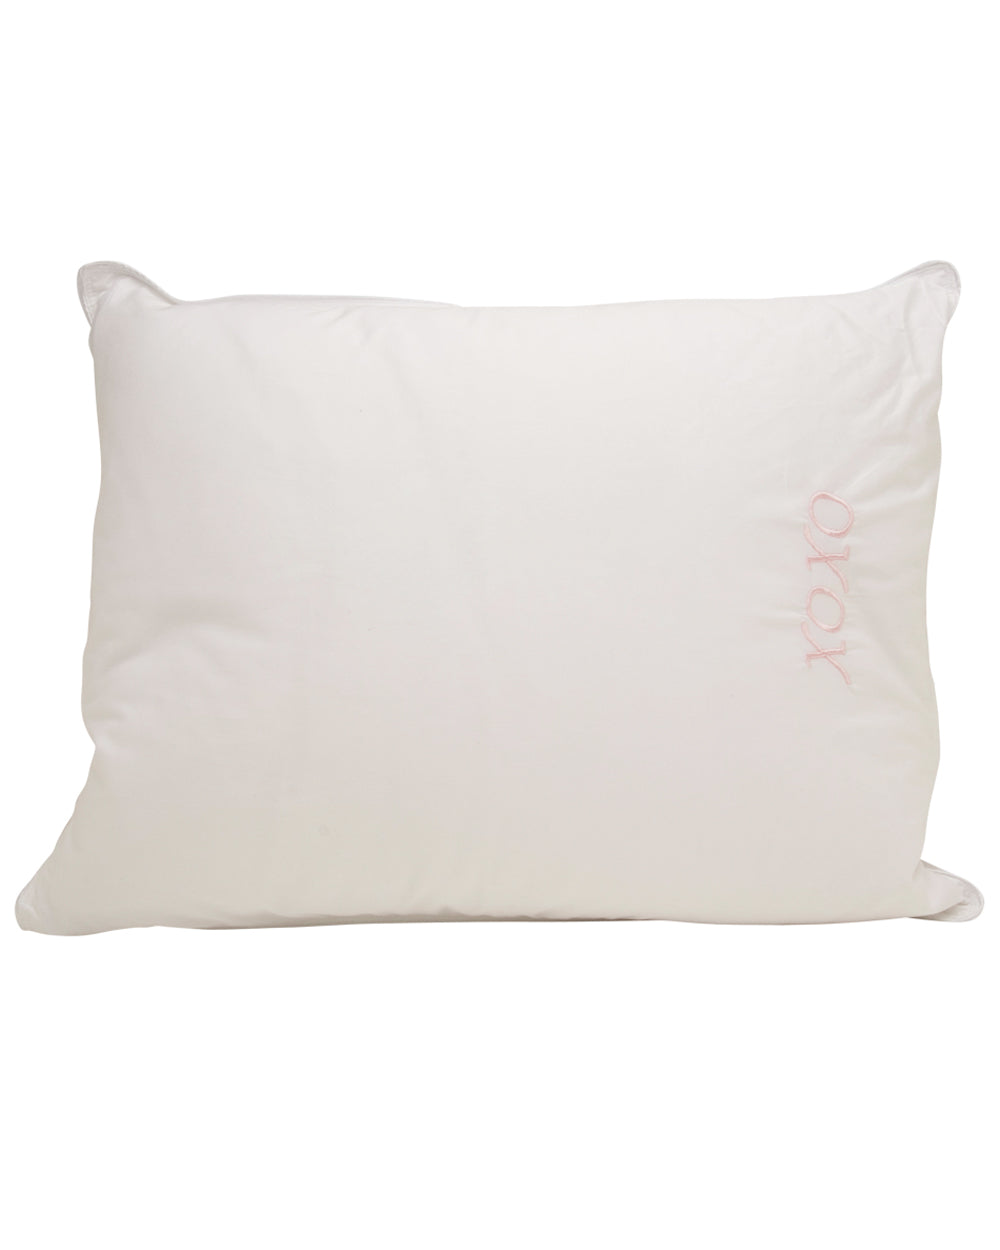 XOXO Petite Roll and Go Pillow